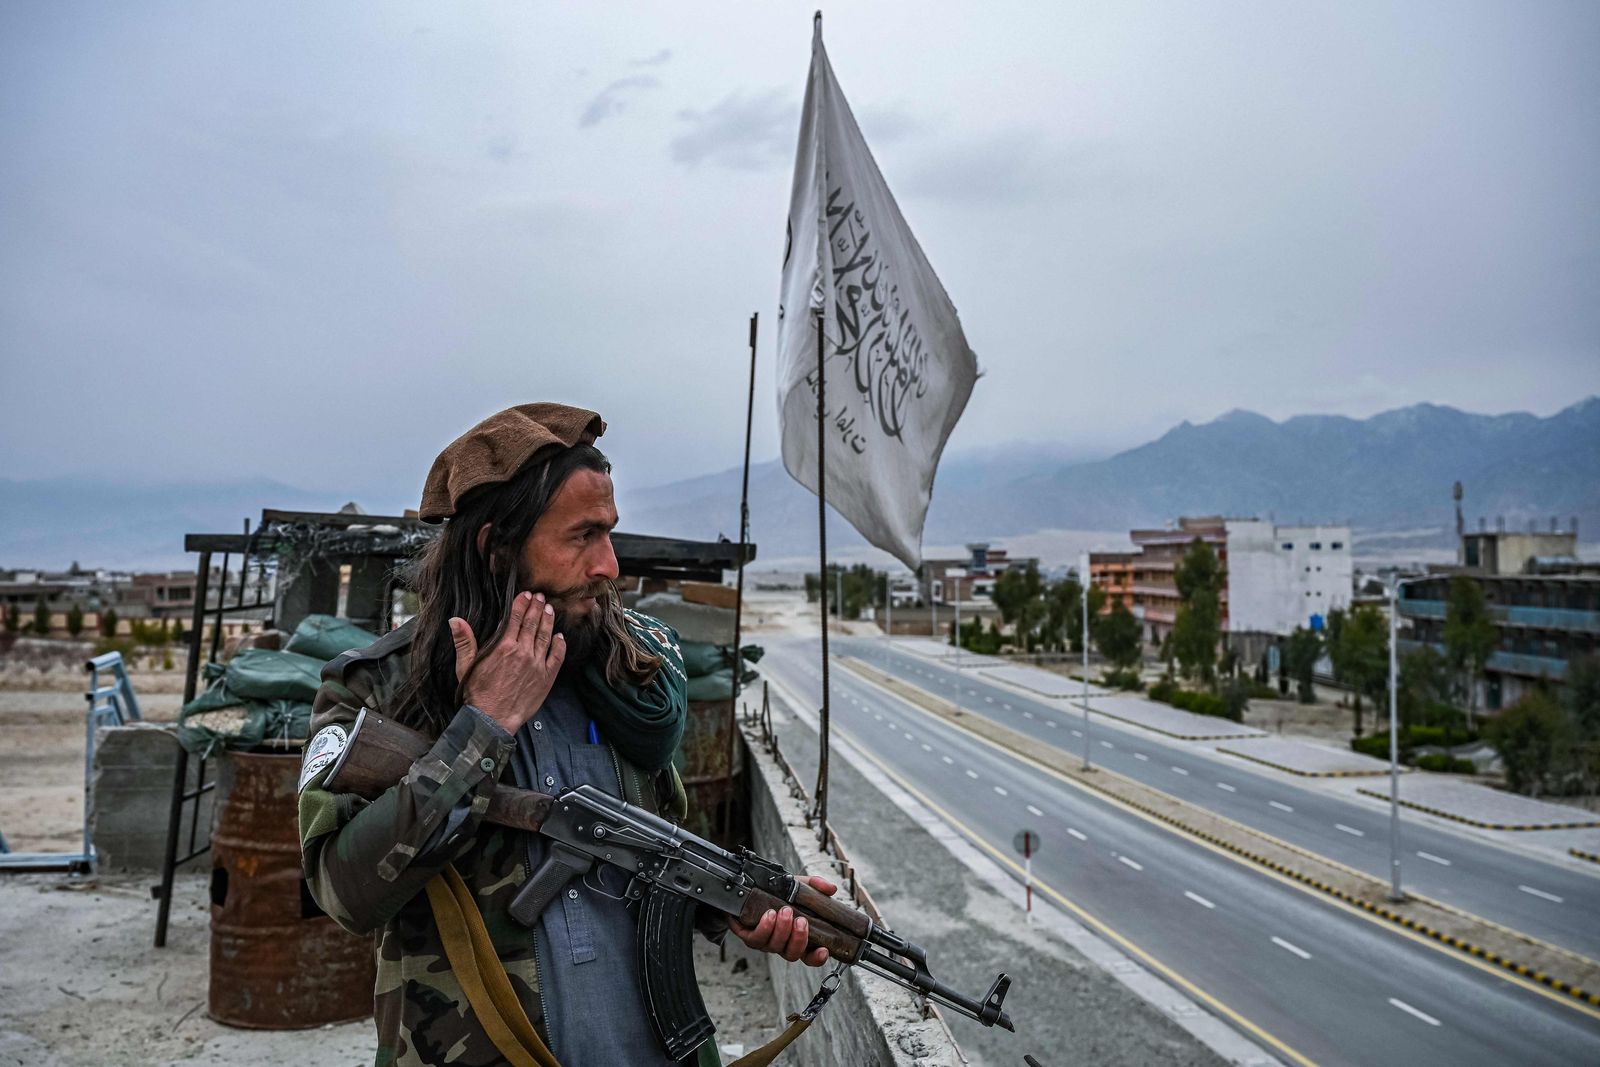 A Taliban fighter mans a post on the roof top of the main gate of Laghman University in Mihtarlam, Laghman province on February 2, 2022. (Photo by Mohd RASFAN / AFP) - AFP